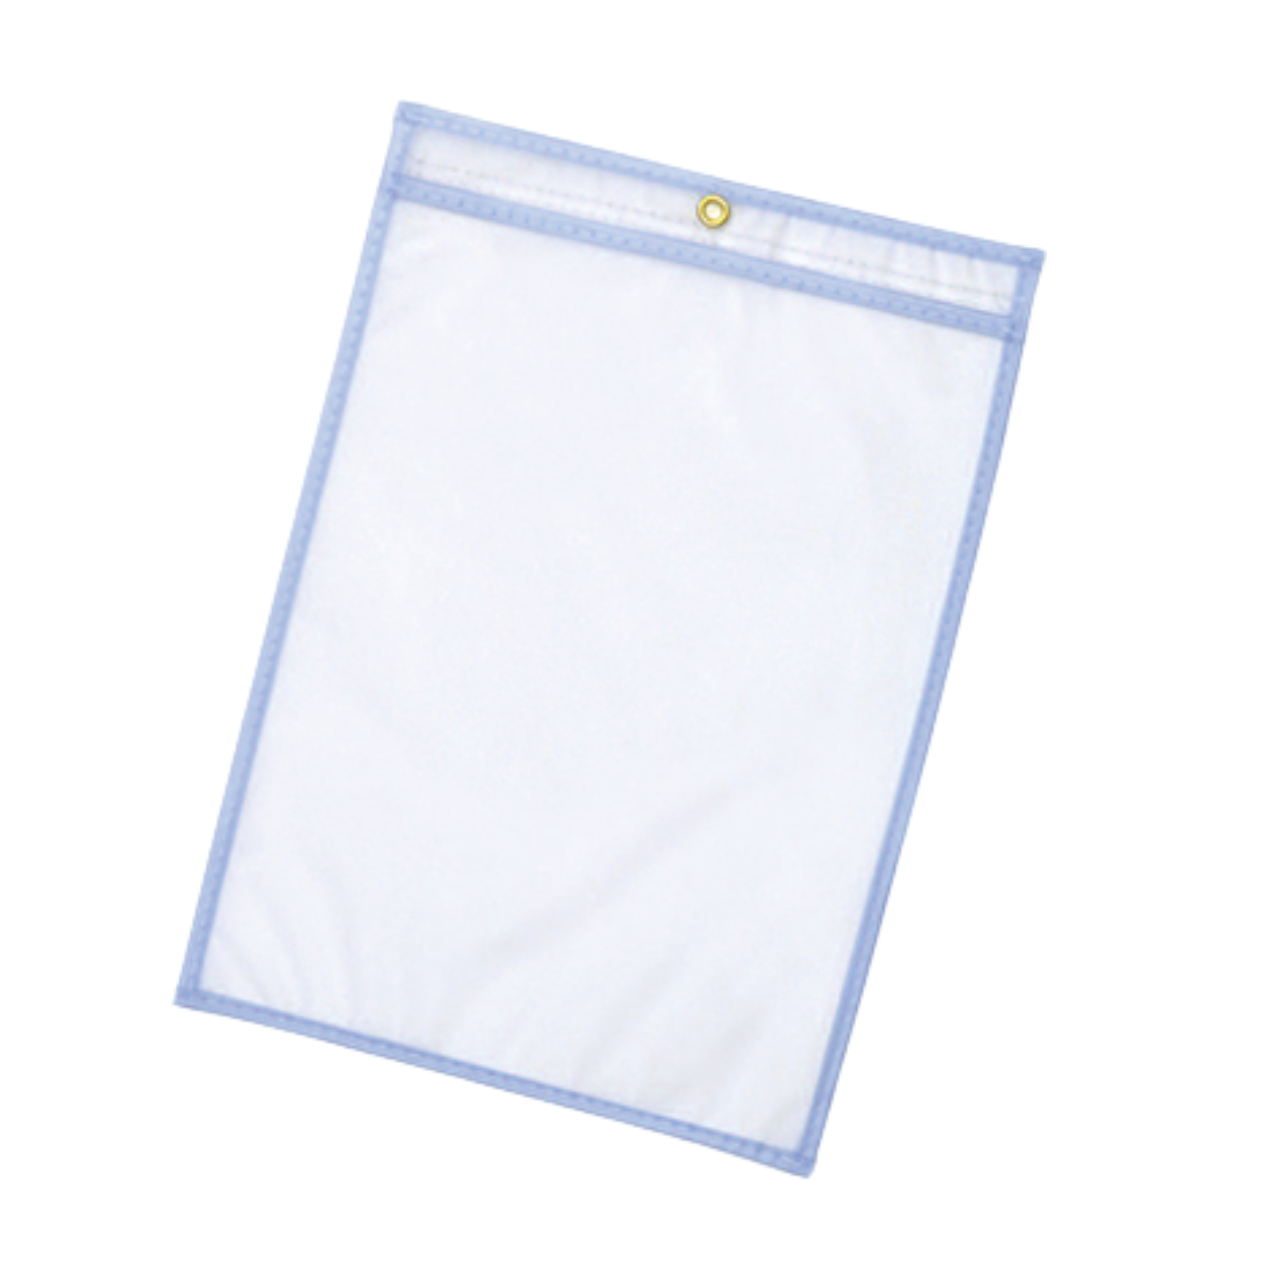 Sheet Protectors; Multiple Sizes, Sewn, ESD Static Safe Clear